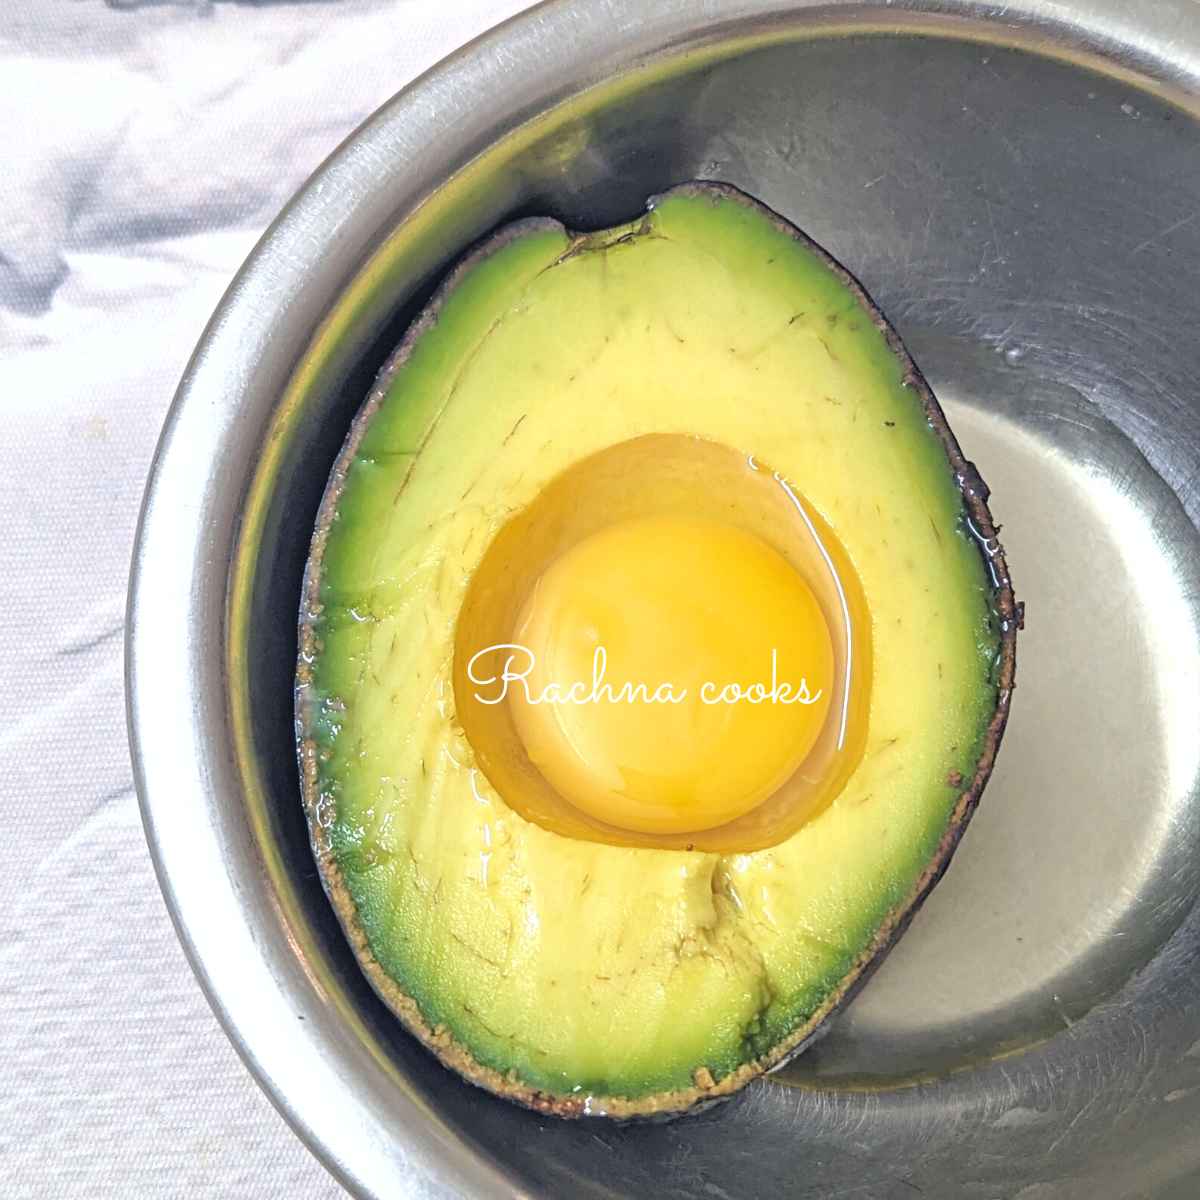 Half of an avocado with yolk and white in the cavity.